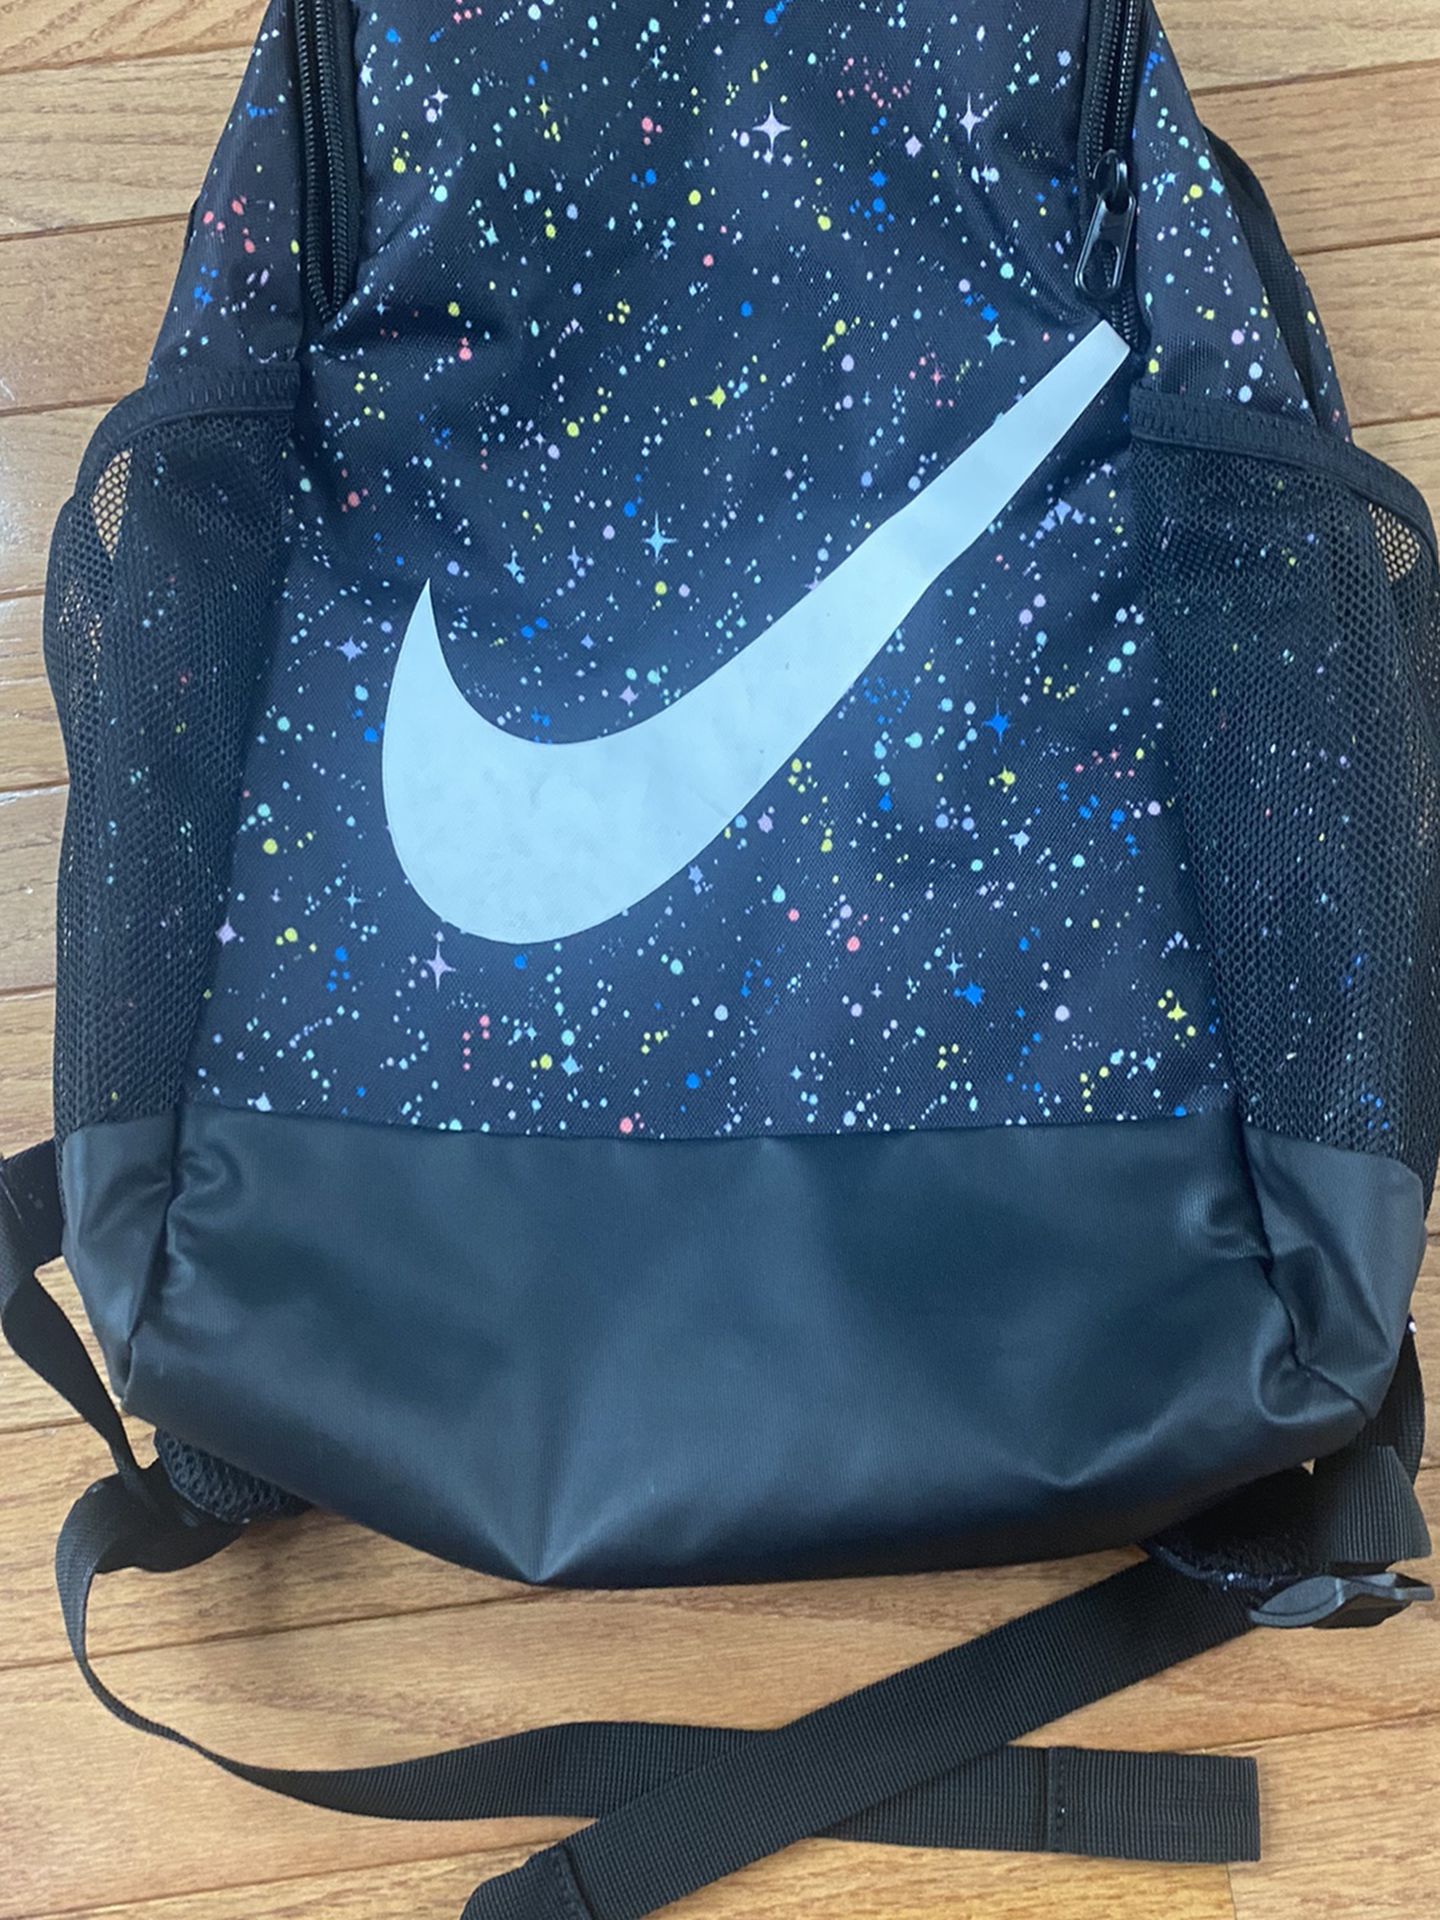 Nike Backpack Only Used A Few Times